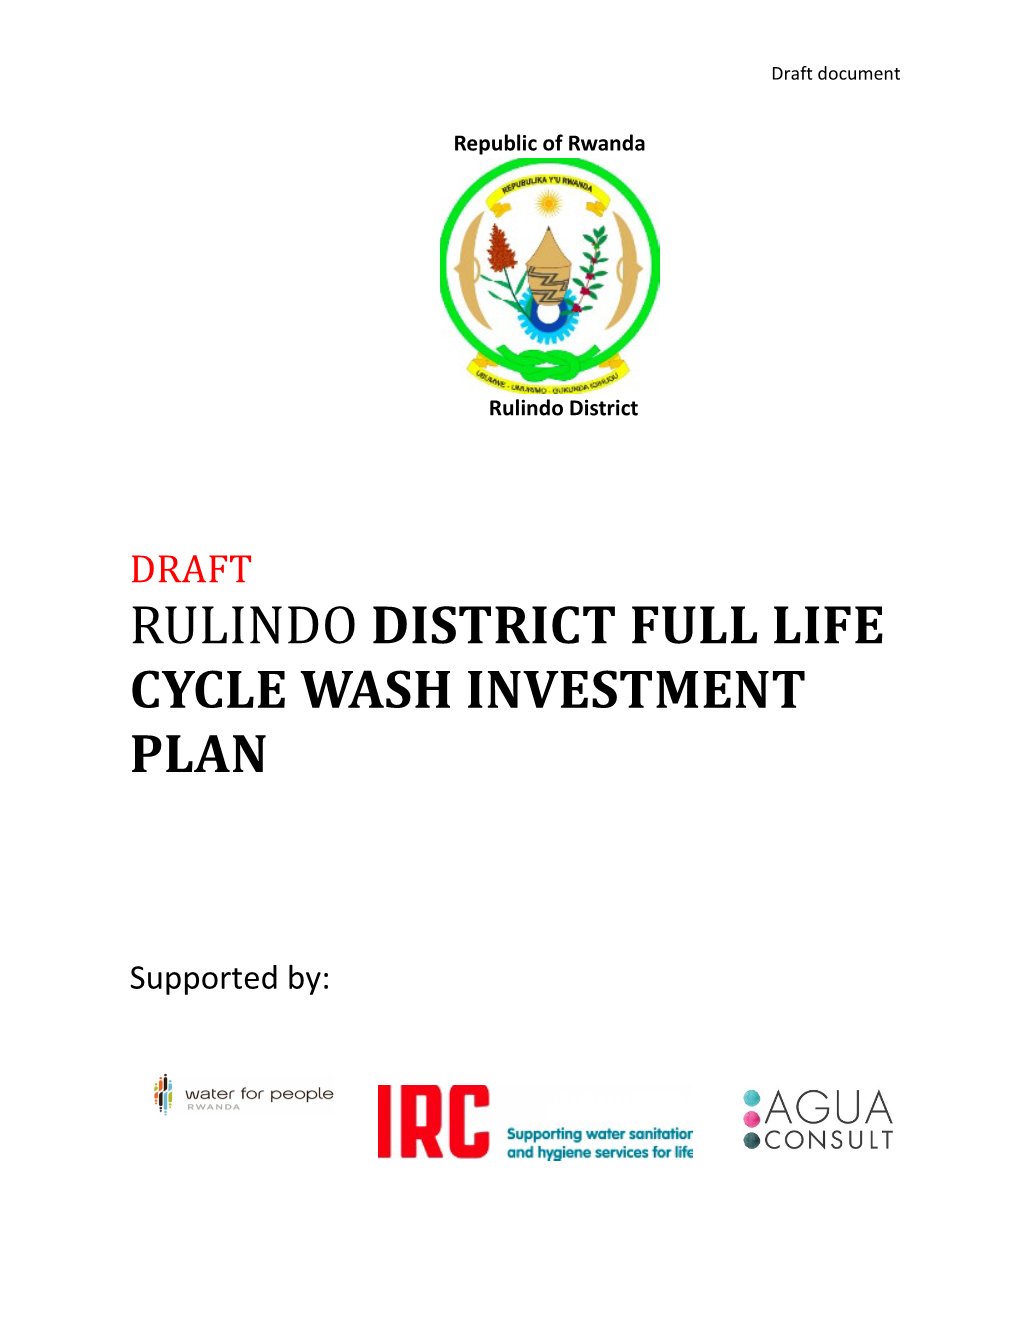 Rulindo District Full Life Cycle Wash Investment Plan